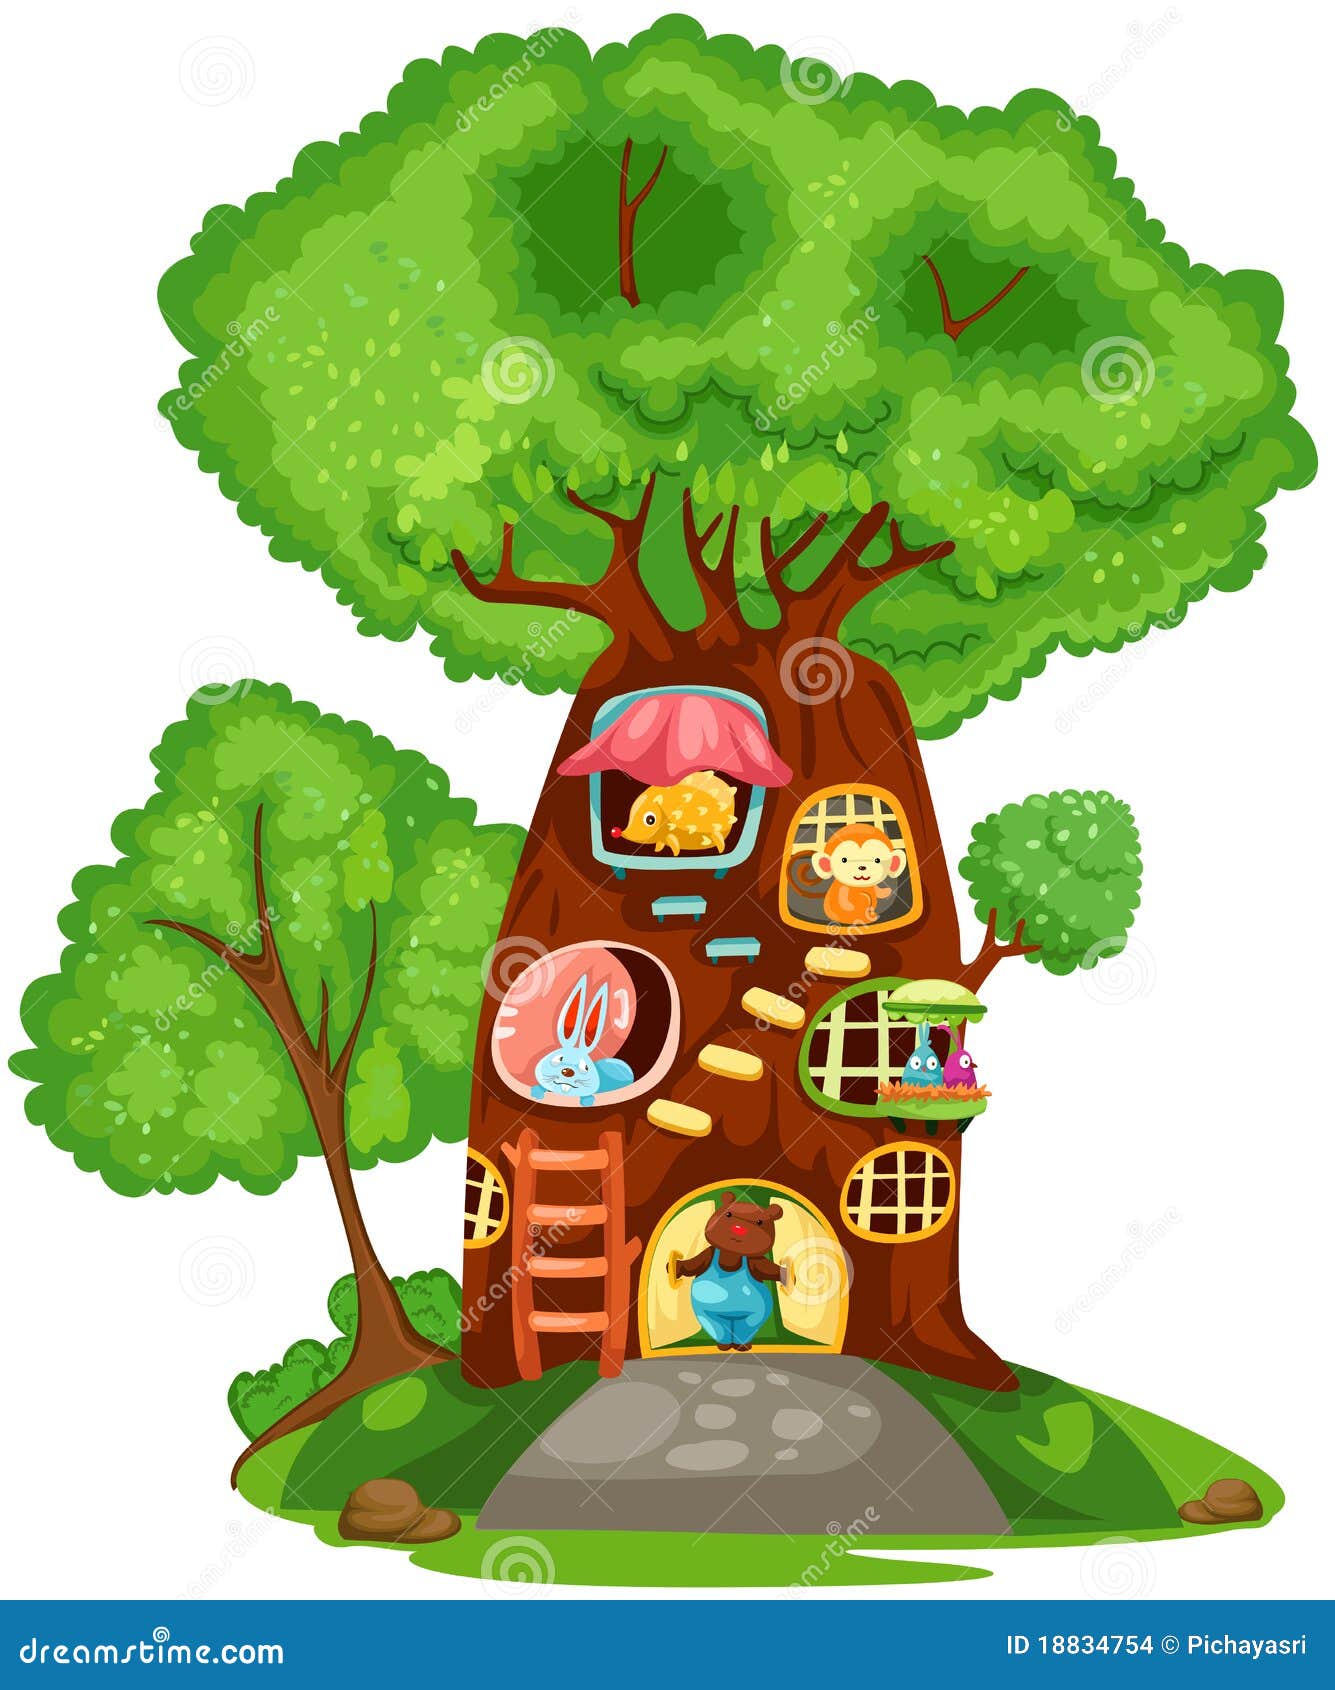 clipart pictures tree house - photo #29